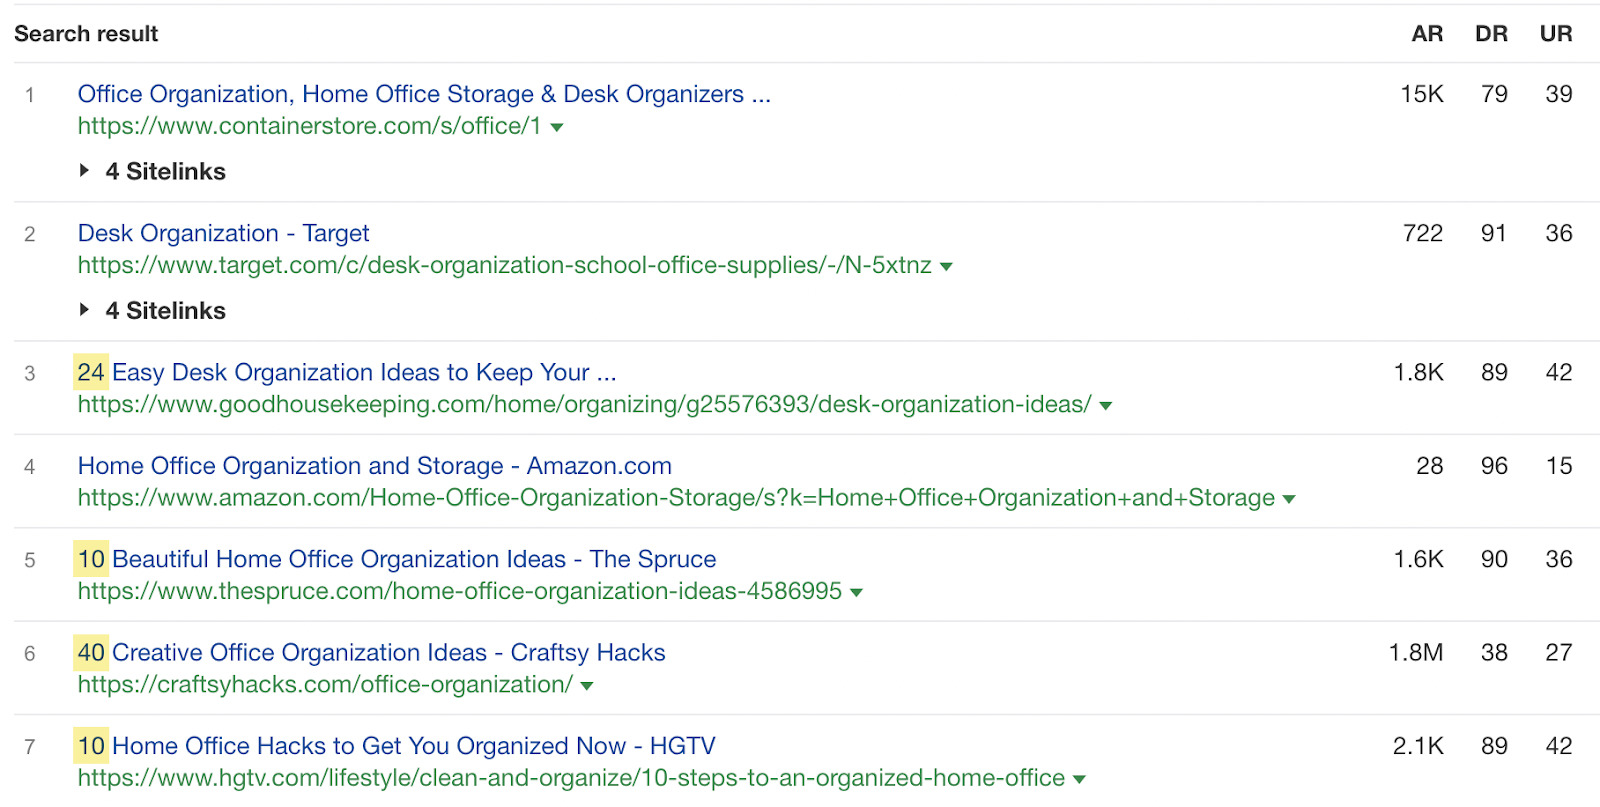 Most of the top search results for 'office organization' are listicles. 